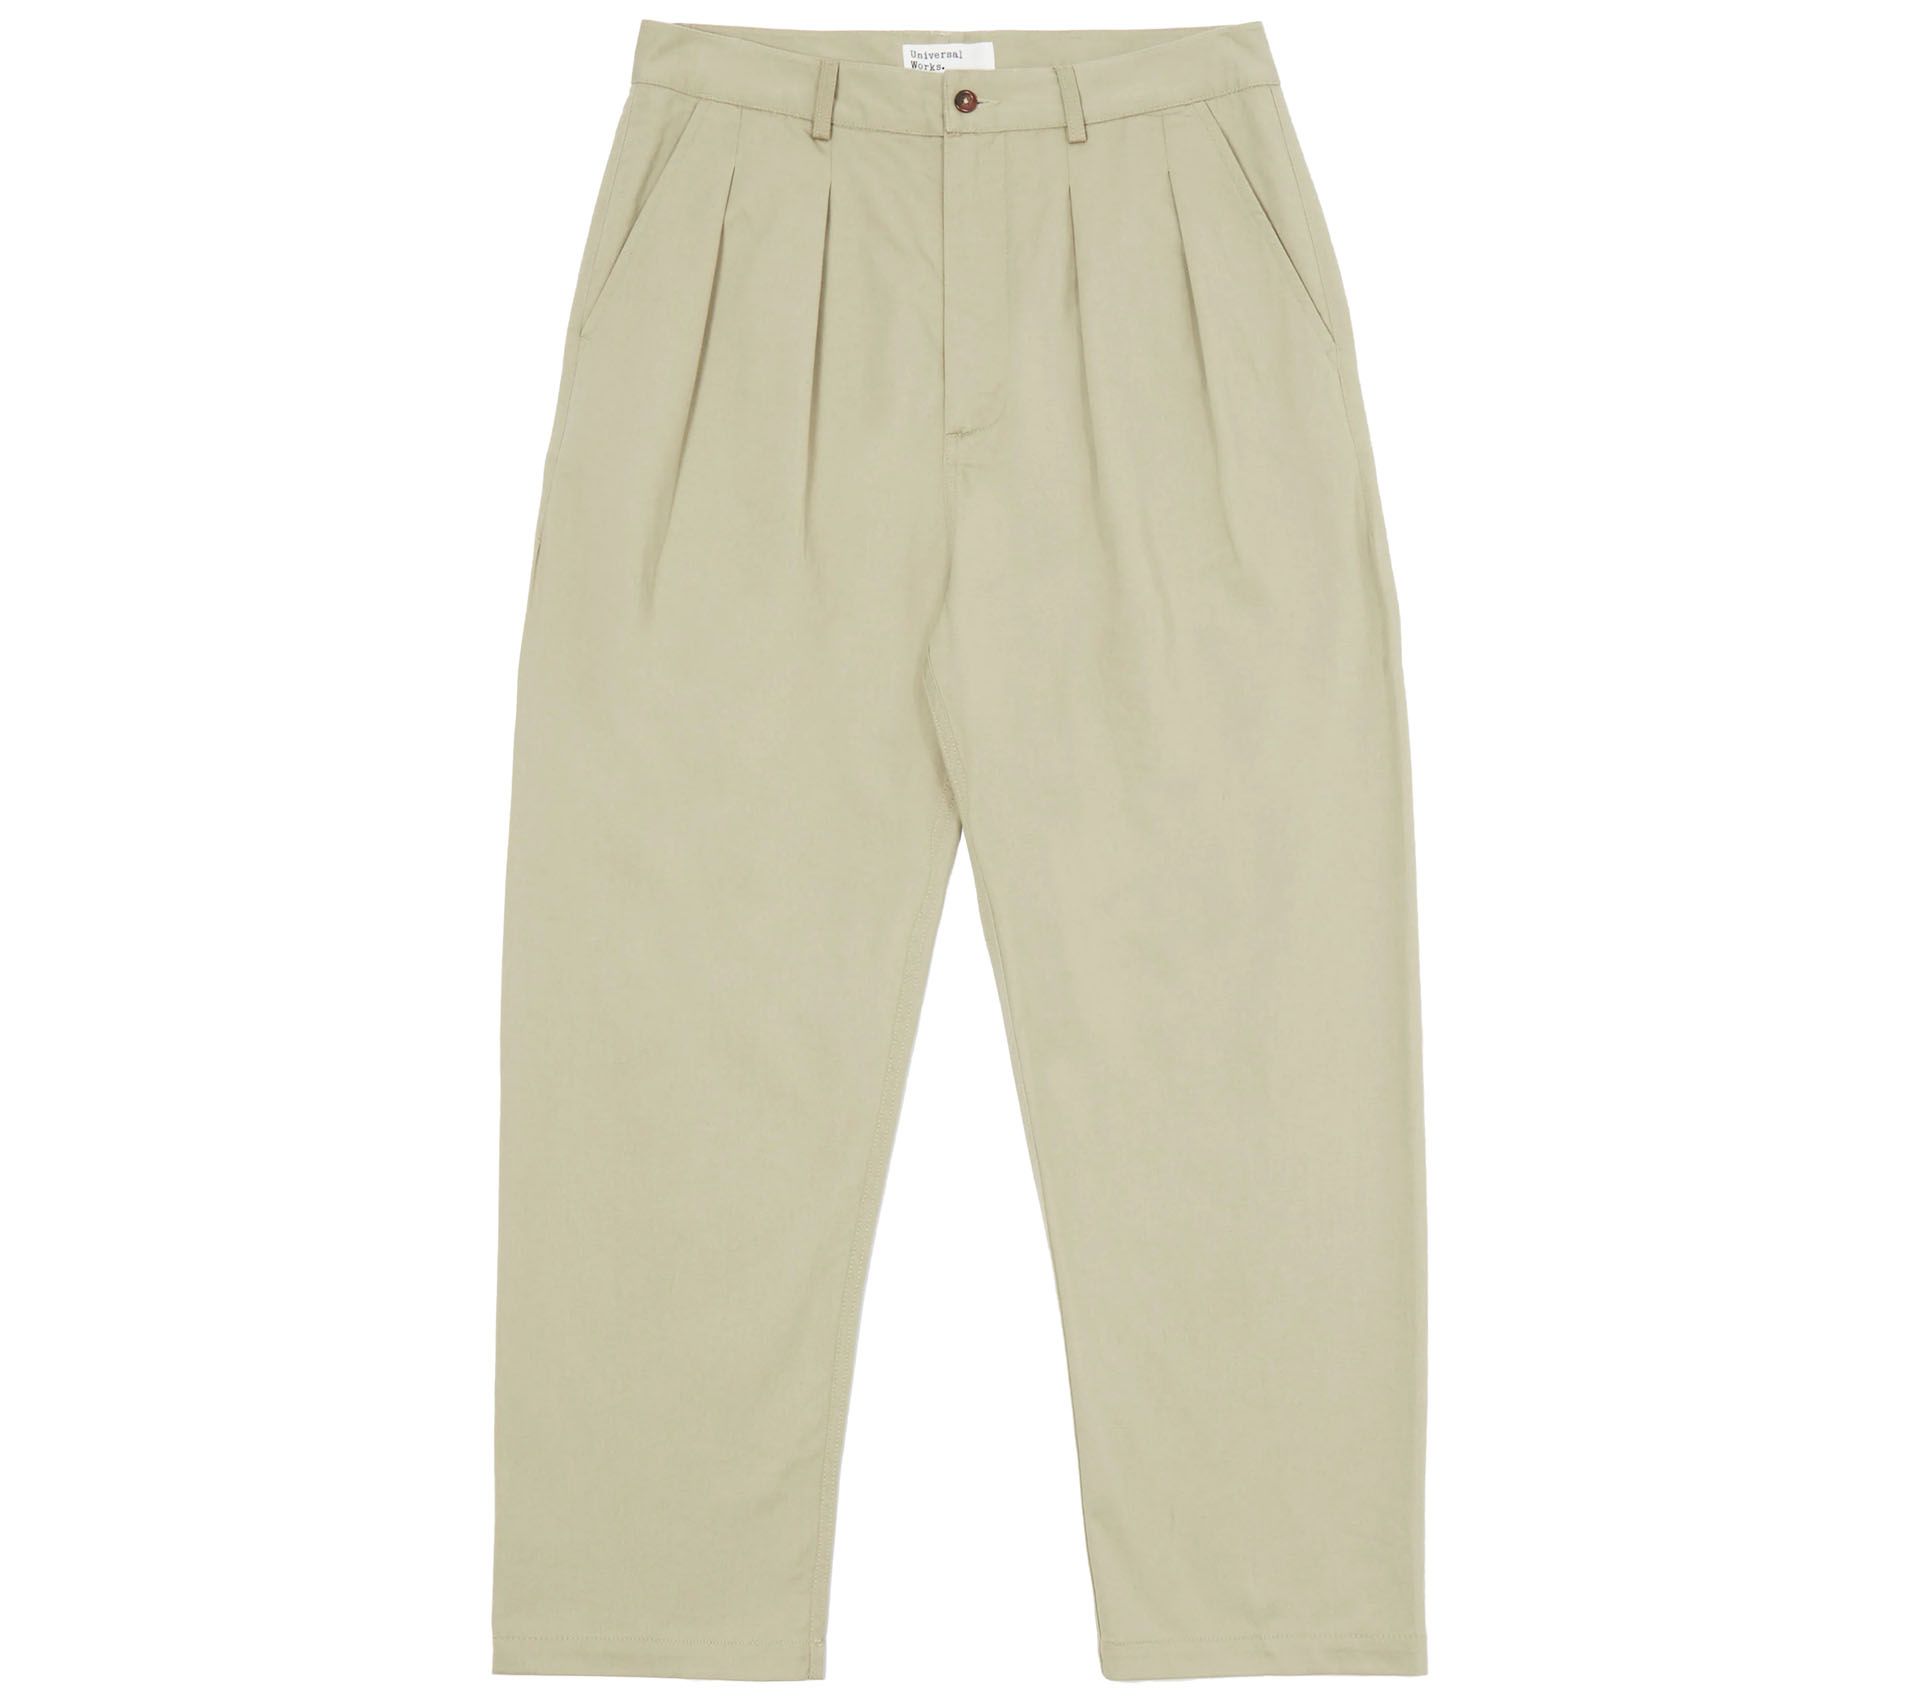 DOUBLE PLEAT PANT TWILL